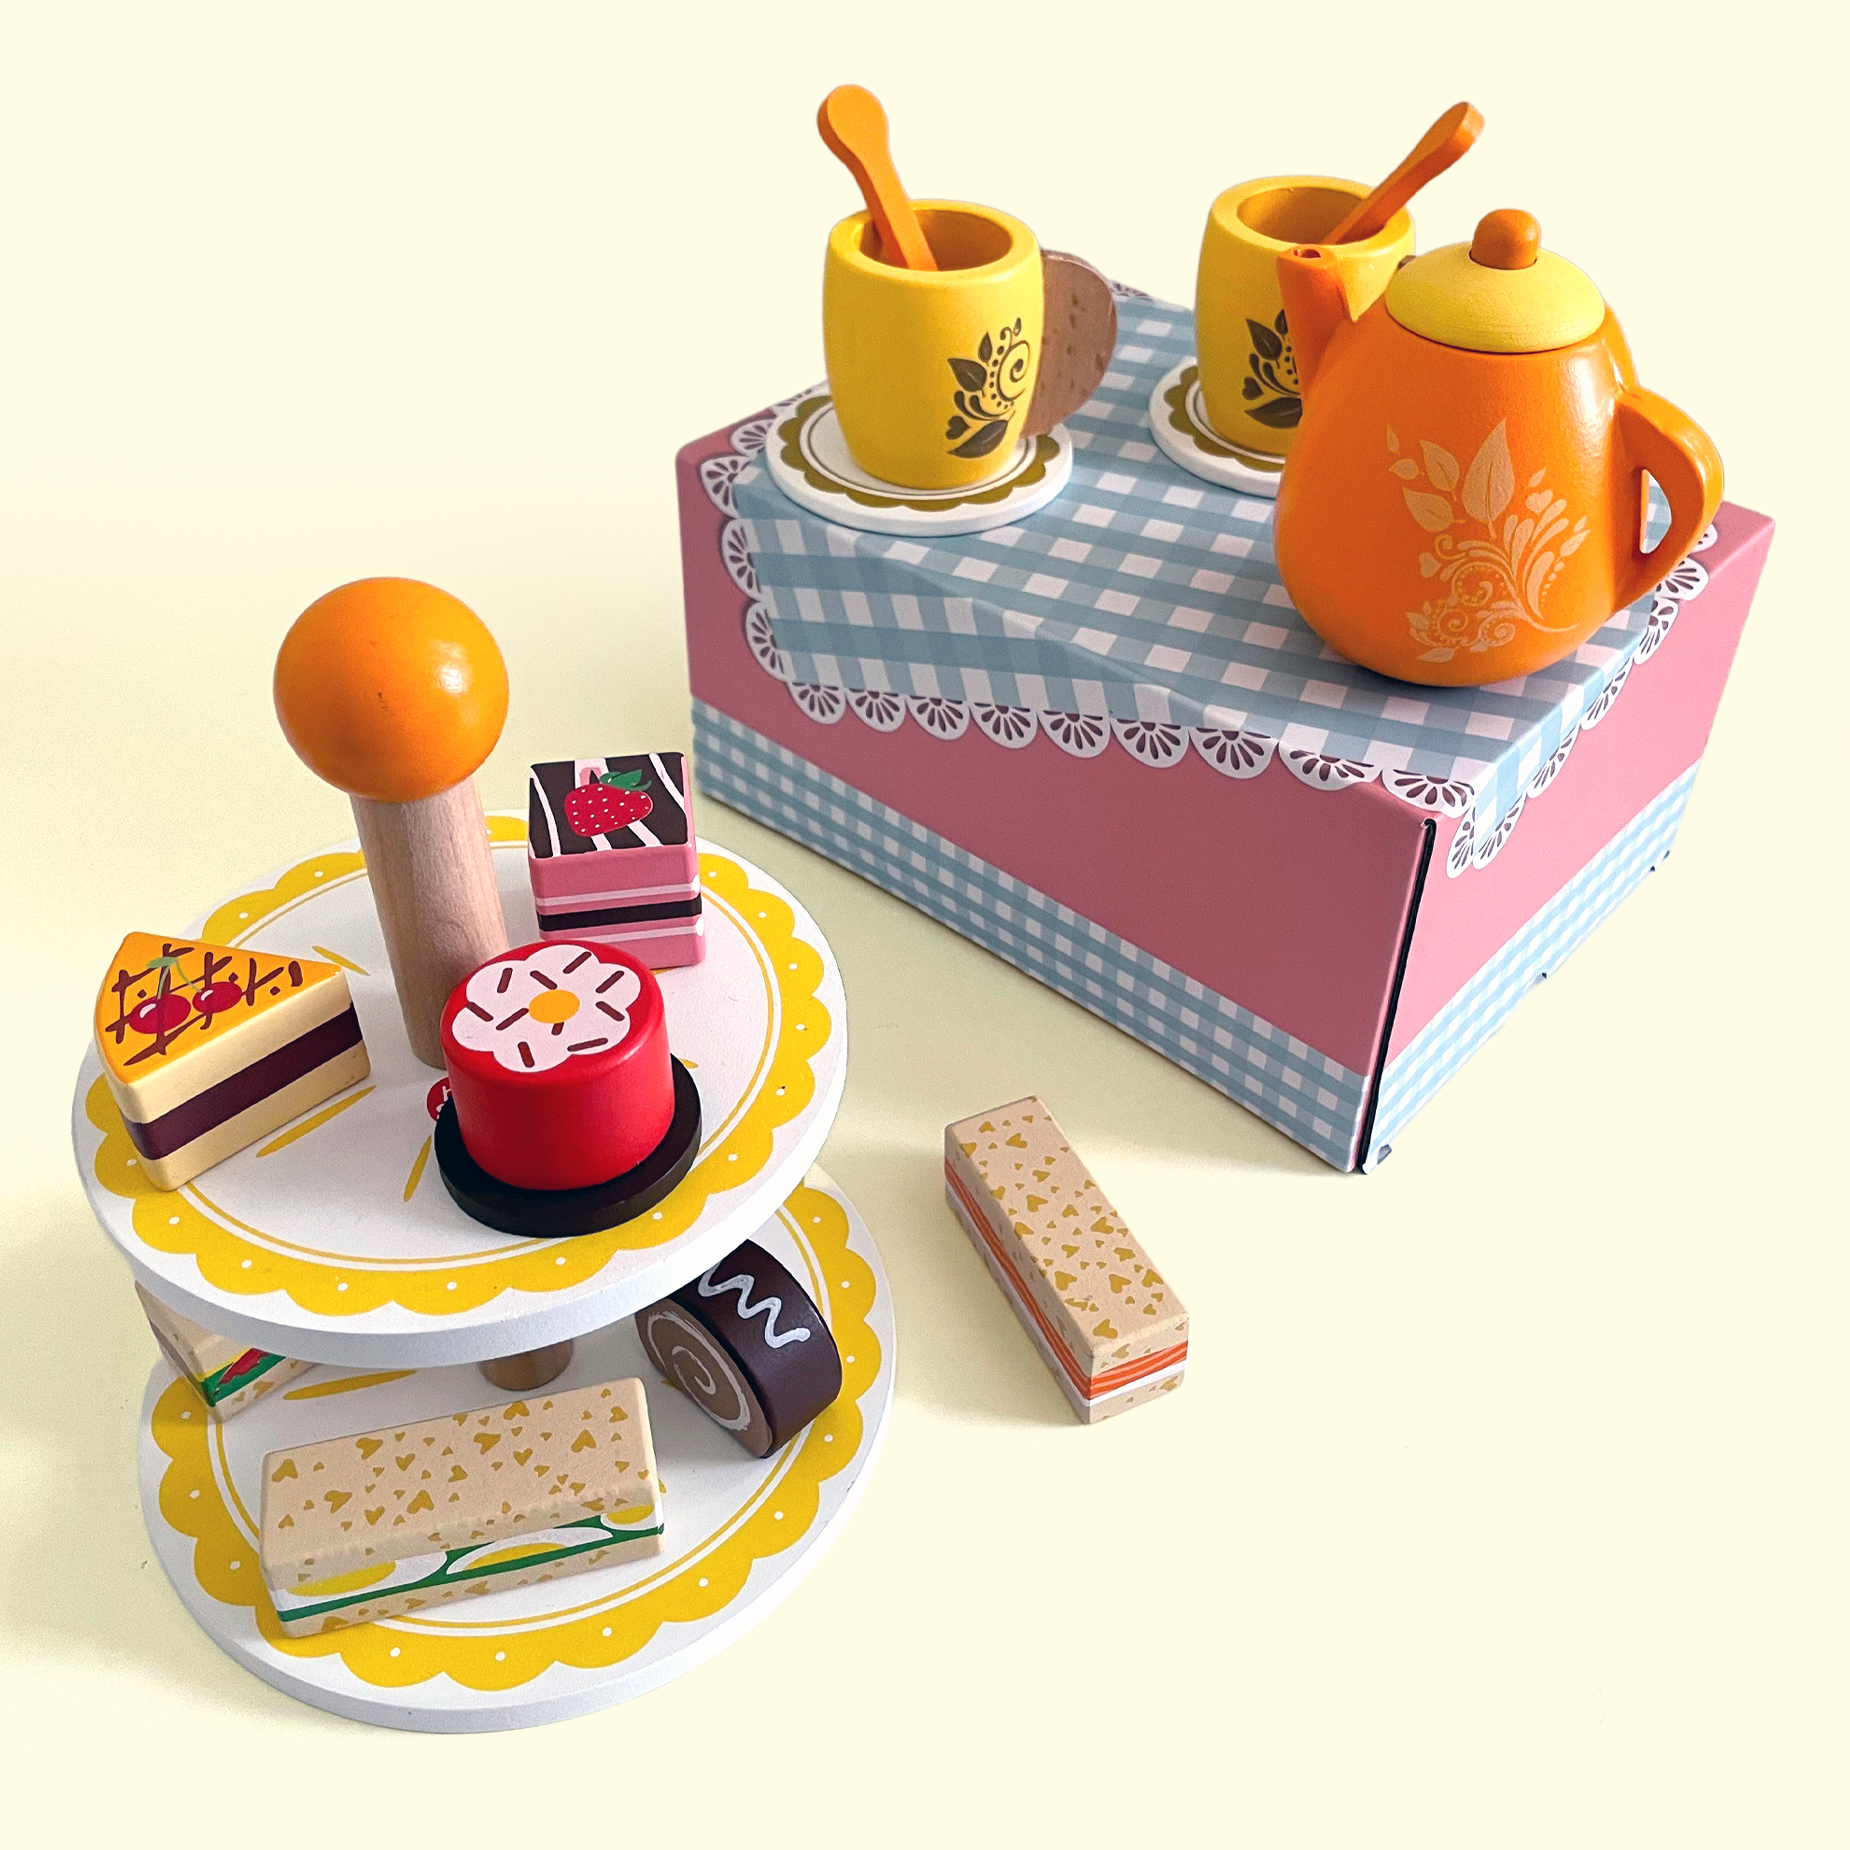 Includes Full Tea and Pastry Set with Cake Stand IQ Toys 39 Piece Tea and Cake Set for Pretend Tea Parties 